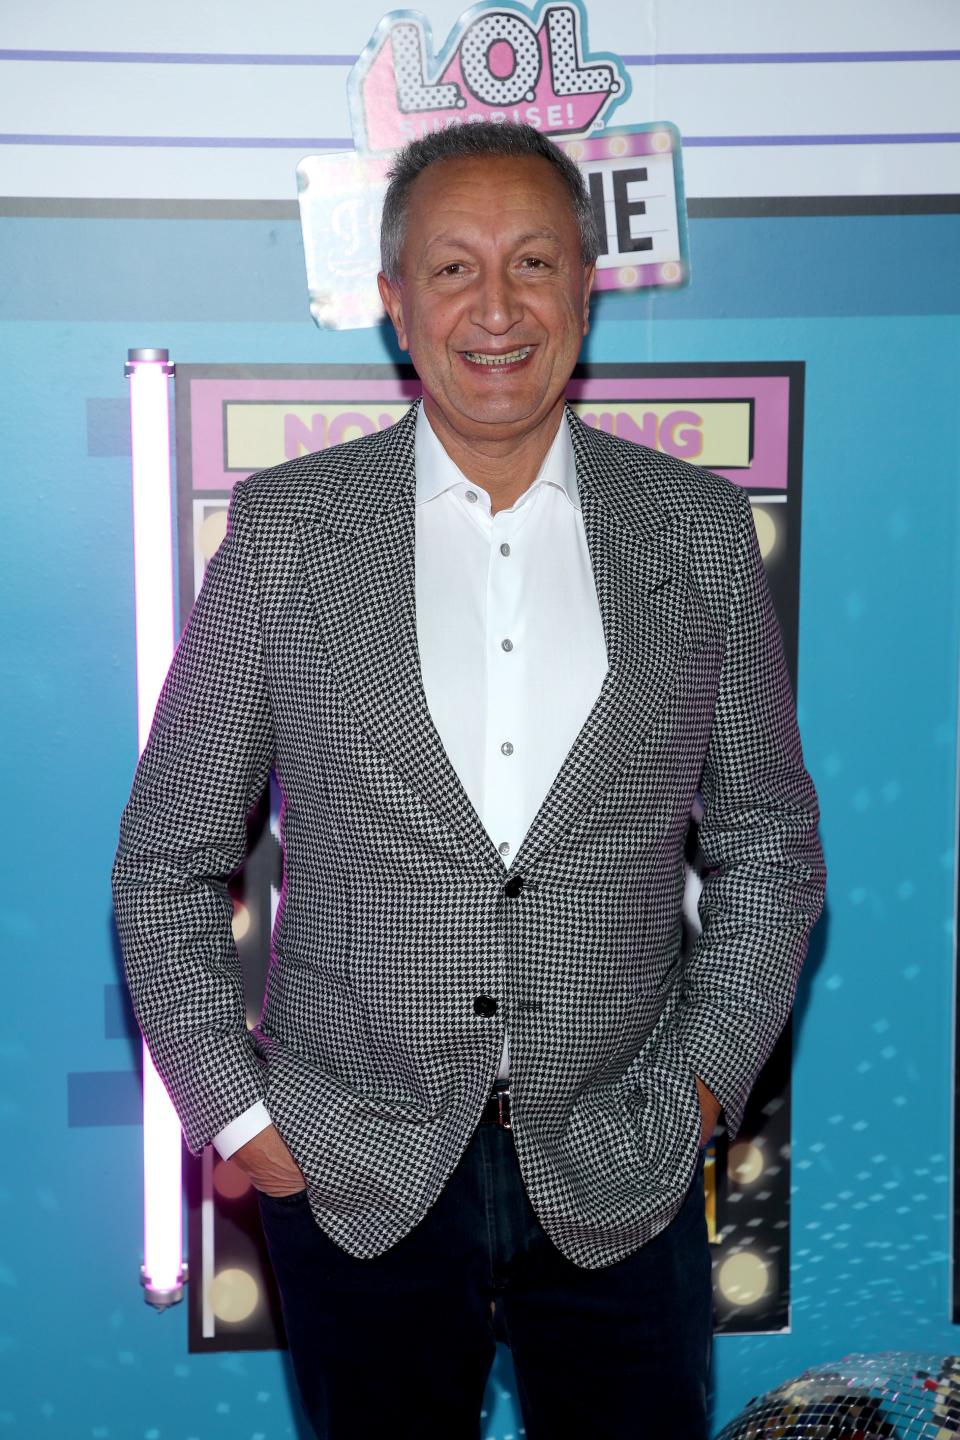 MGA Entertainment CEO Isaac Larian, seen at the October premiere of "LOL Surprise: The Movie" in Los Angeles, heads a company that oversees many popular children's toy brands, including "L.O.L. Surprise!" and "Rainbow High" dolls.